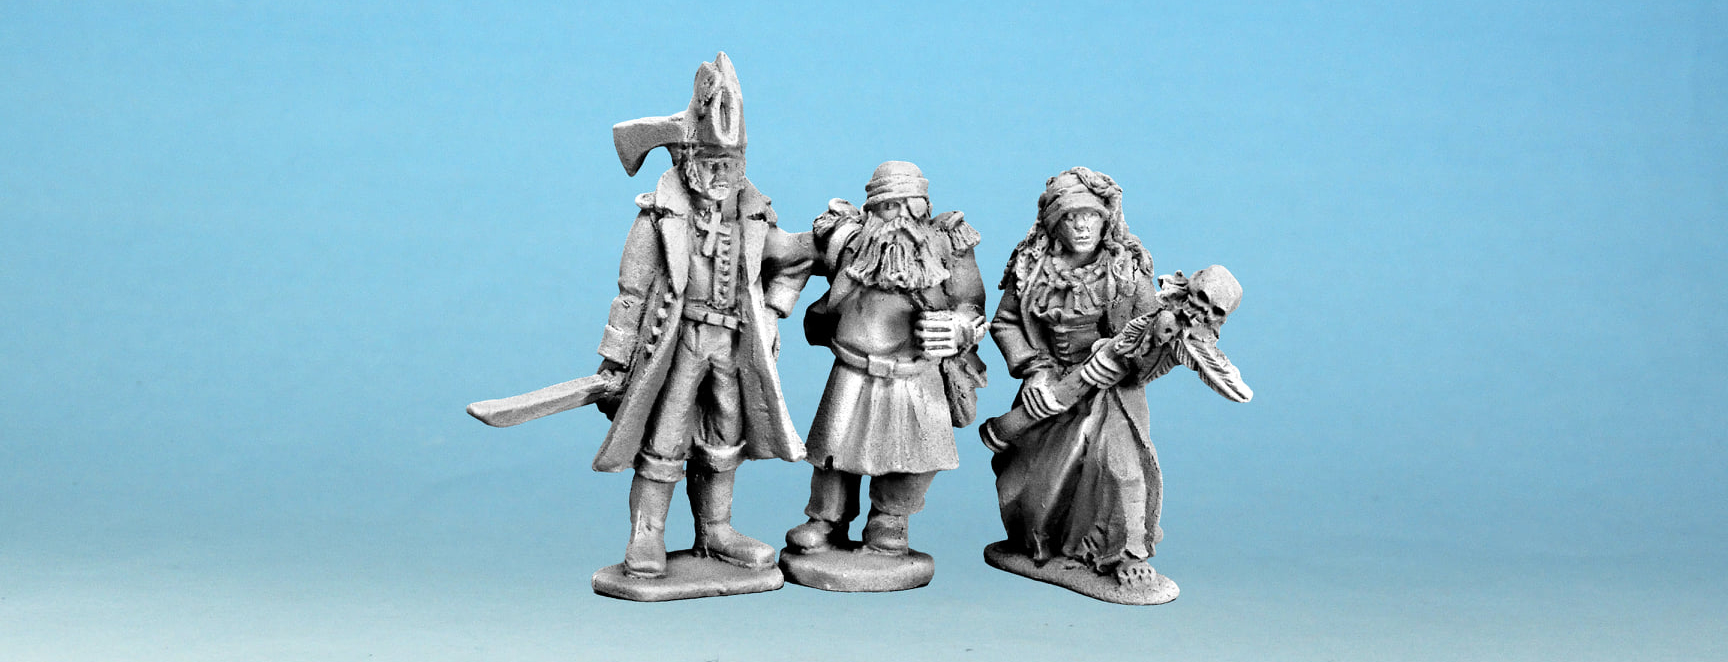 Silver Bayonet Previews #1 - North Star Military Figures